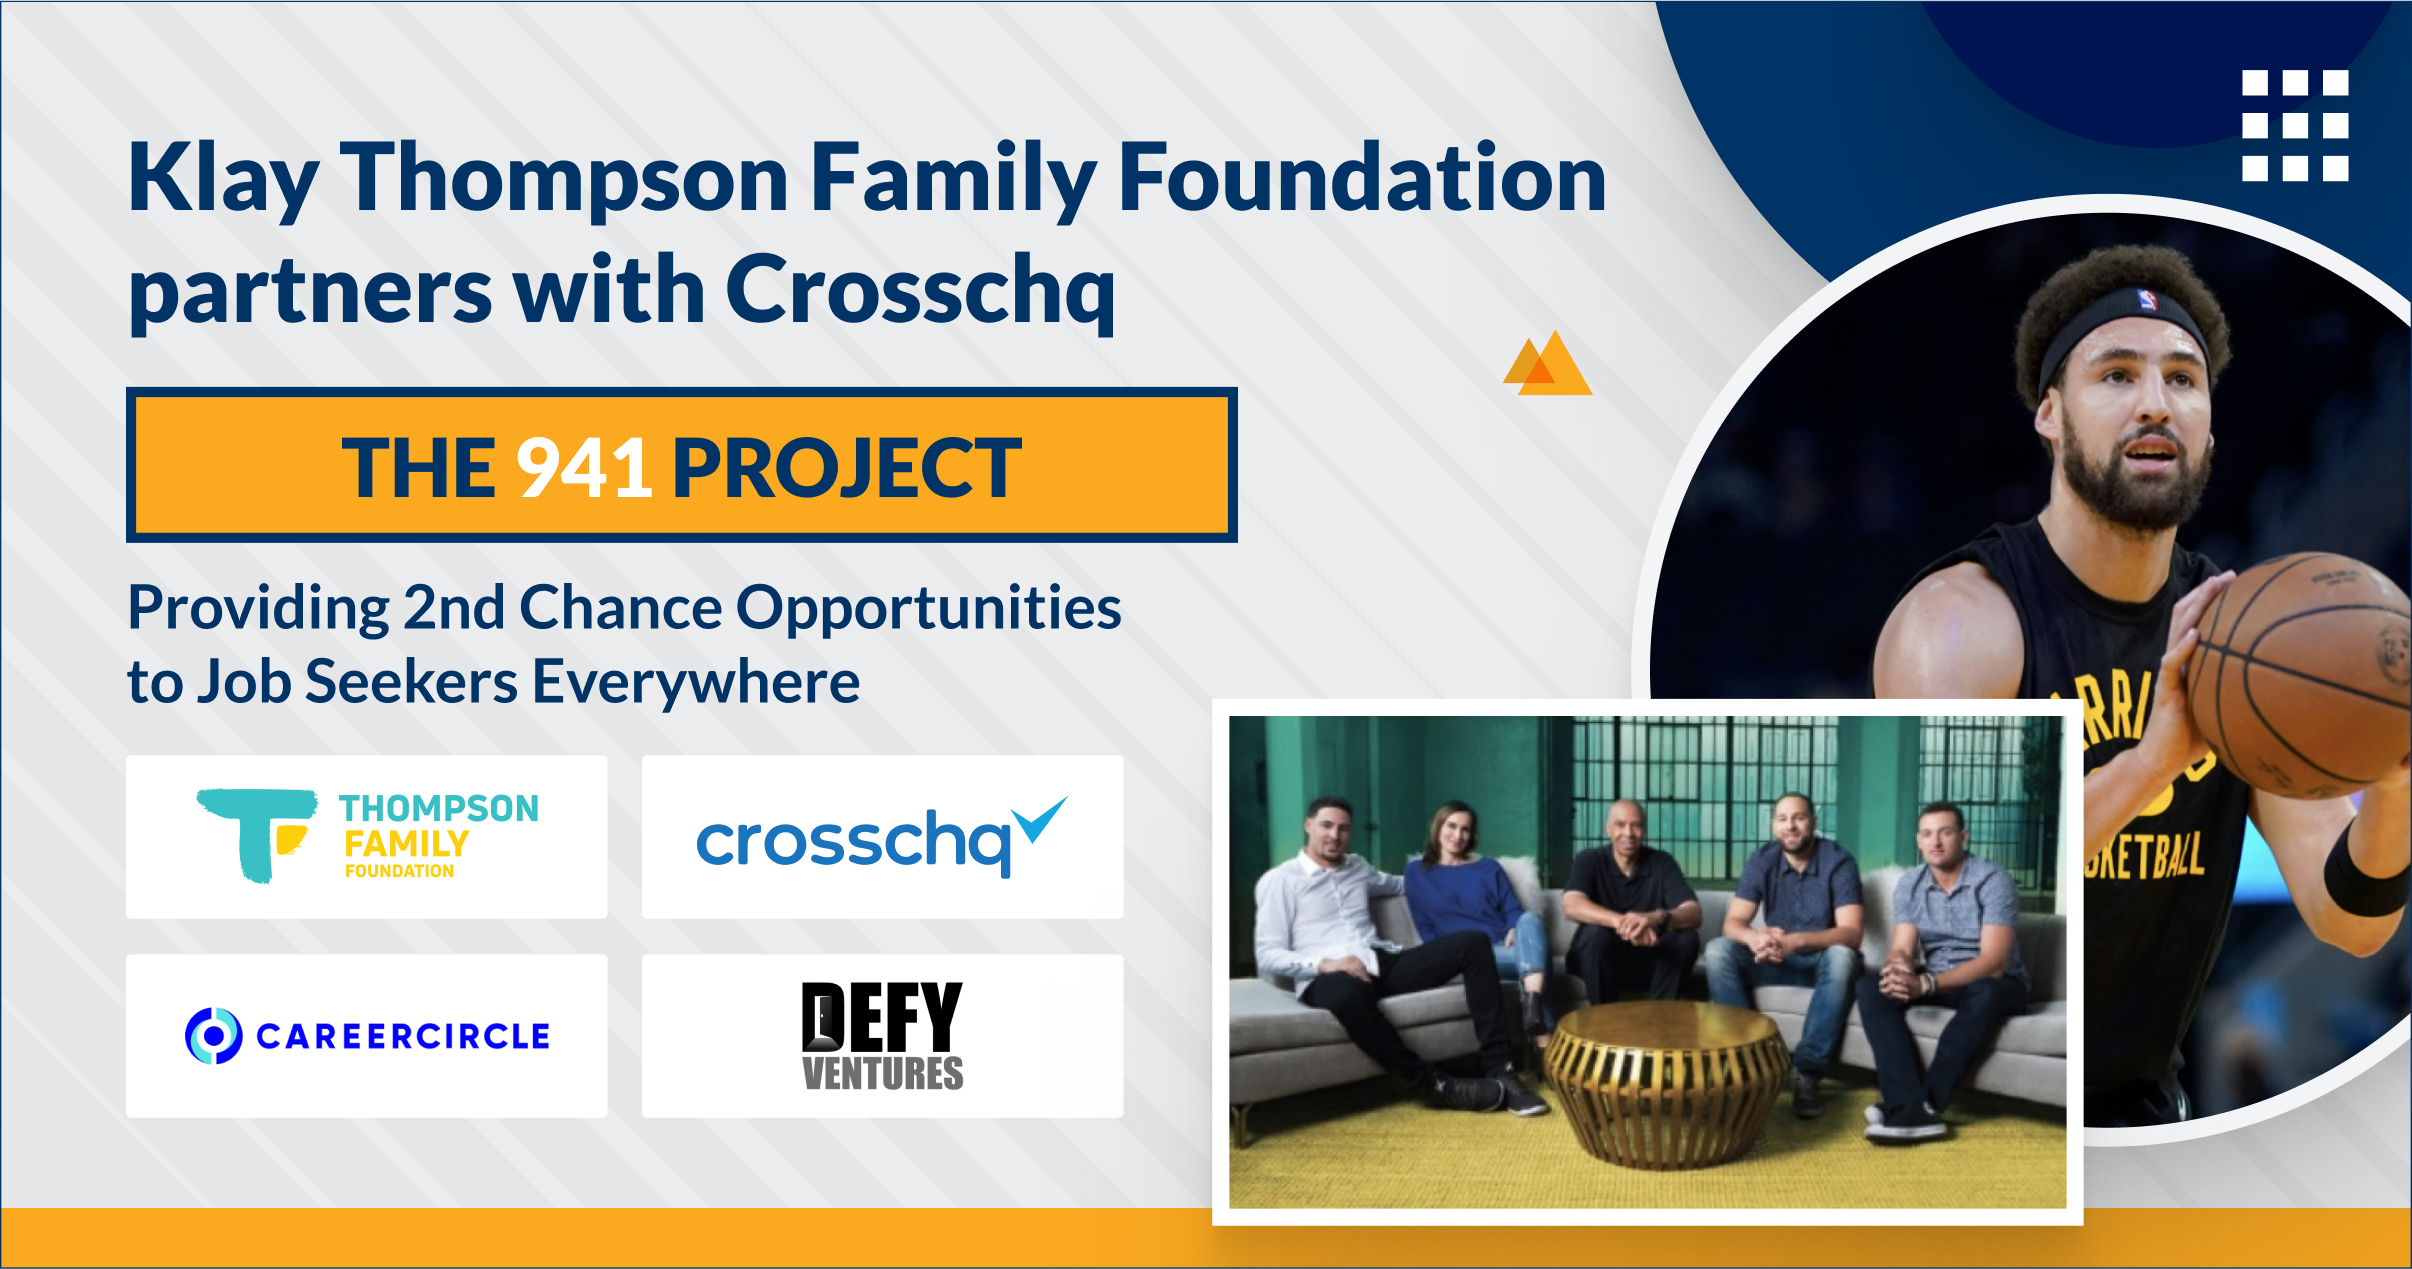 Crosschq Teams Up with NBA All-Star Klay Thompson to Provide 2nd Chance Opportunities to Job Seekers Everywhere with The 941 Project